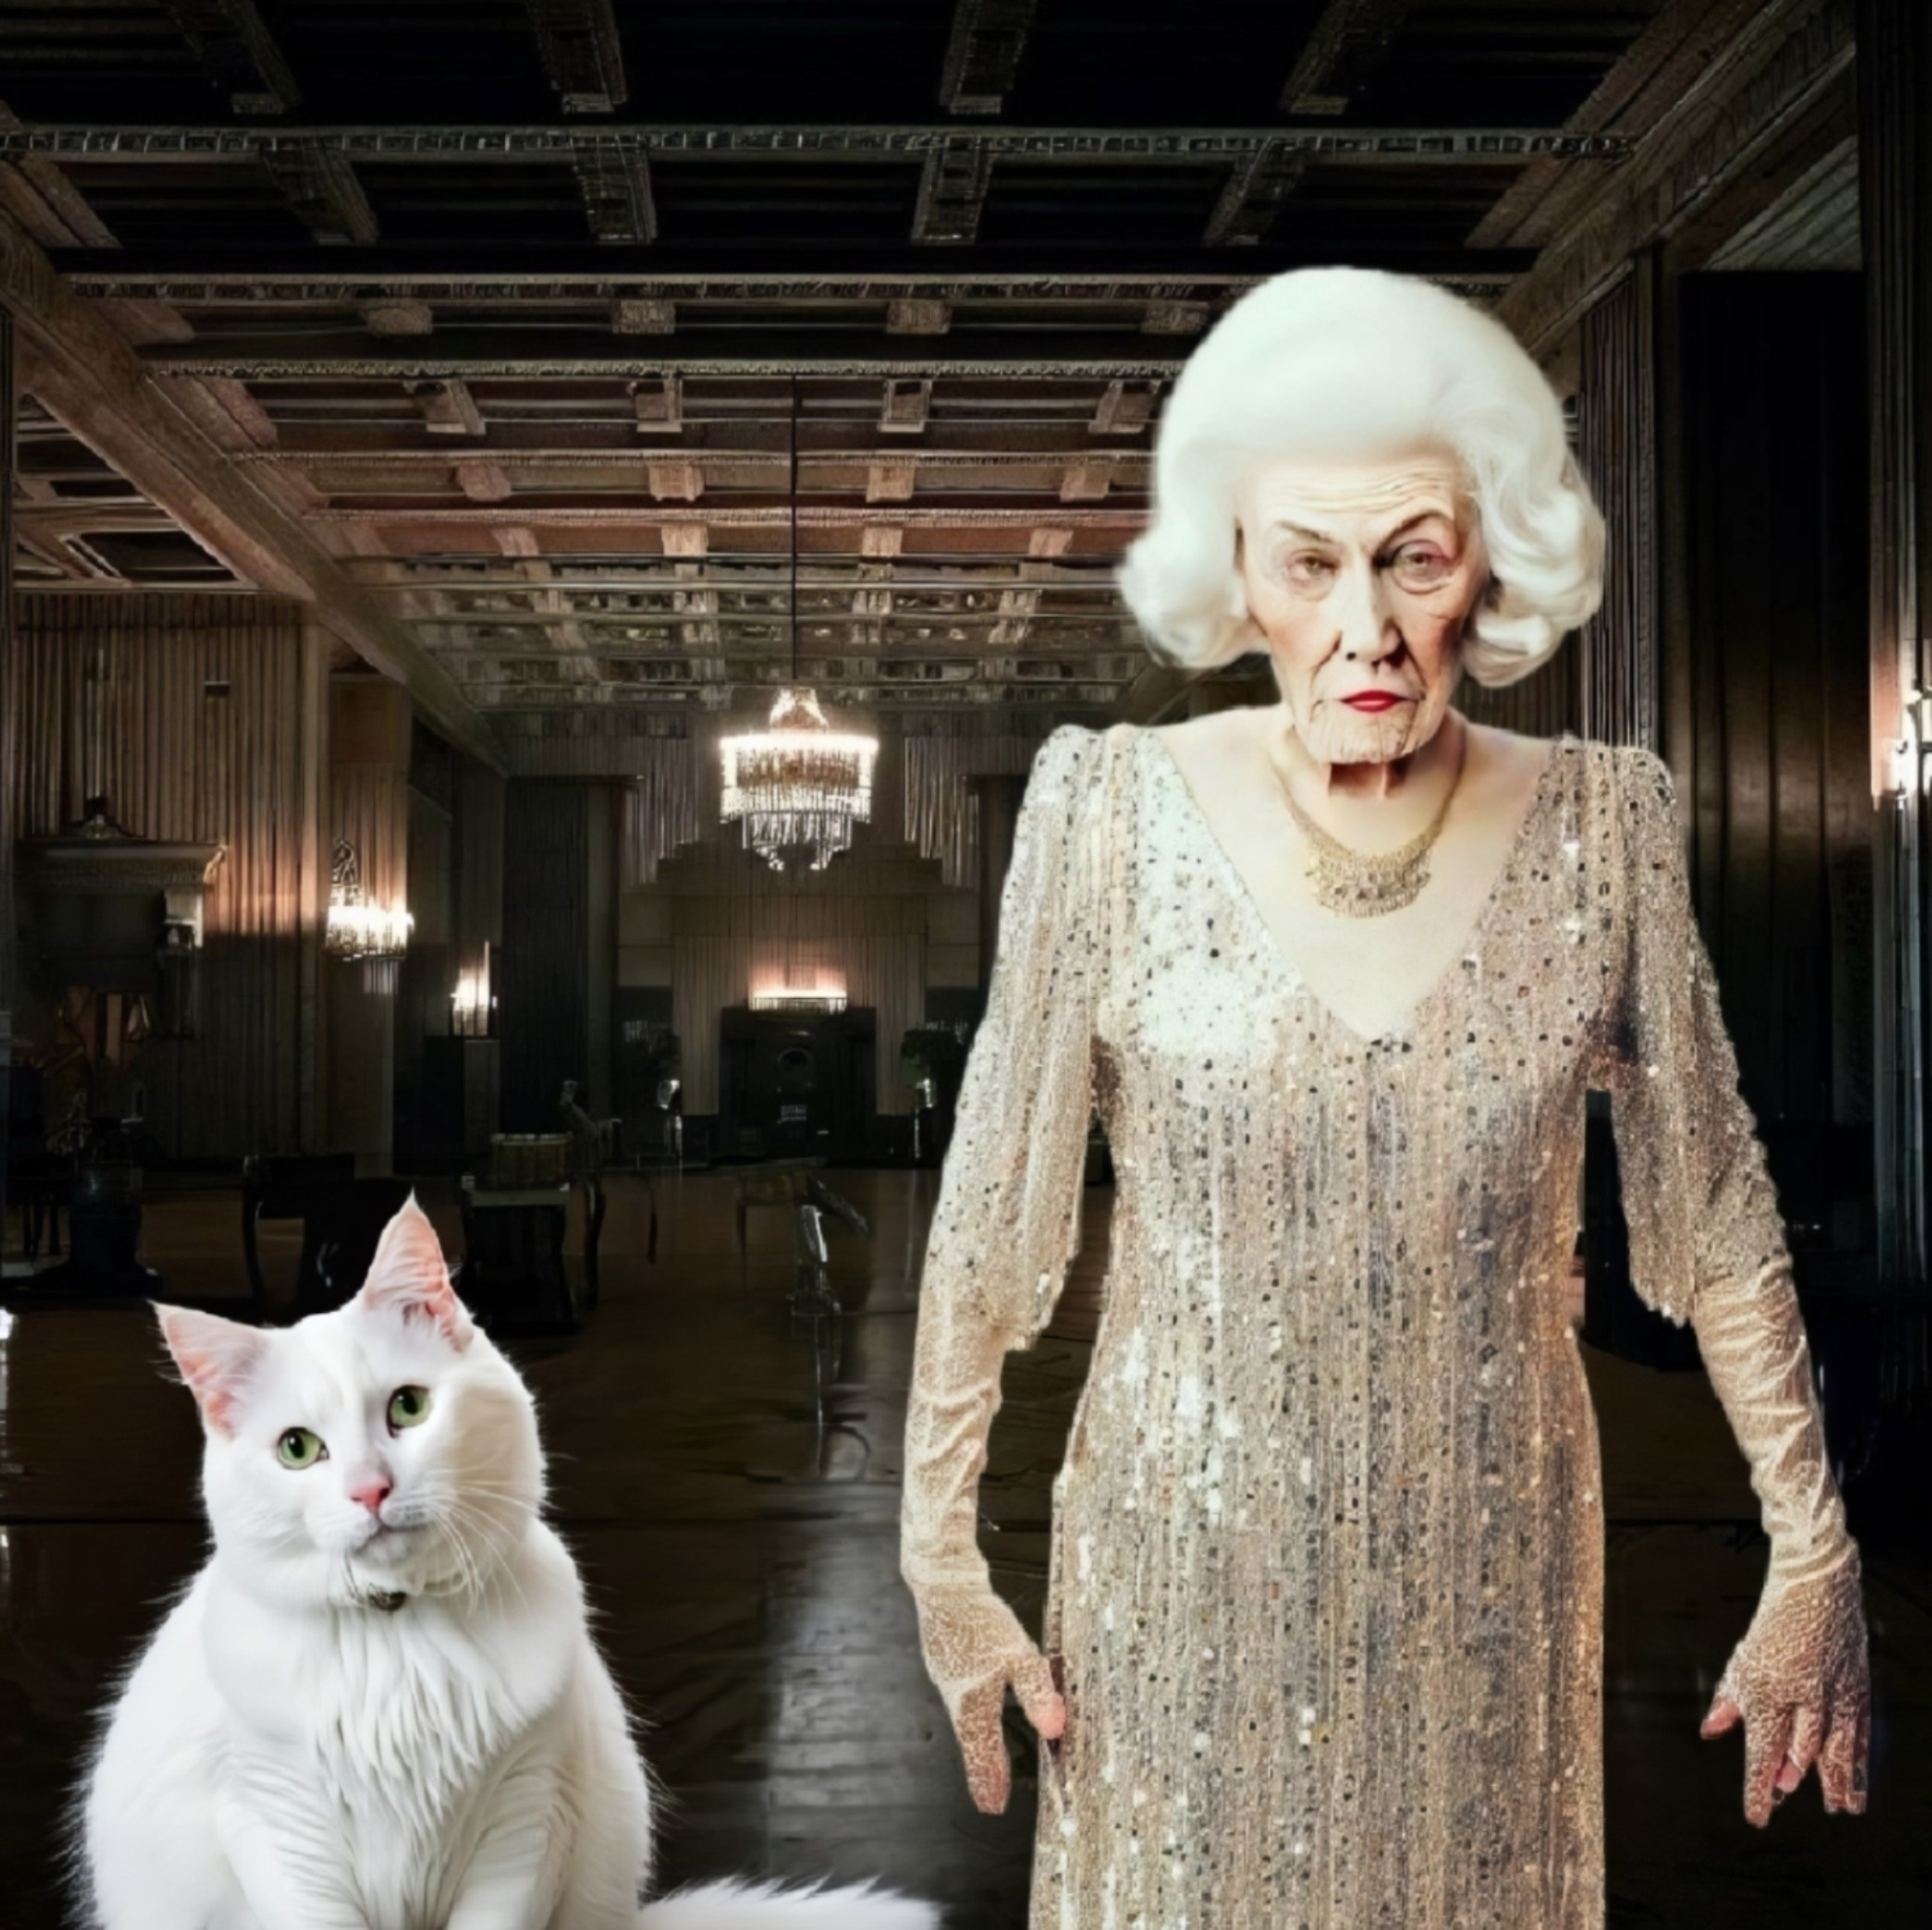 An elderly elegantly dressed lady in her mansion with her white cat.